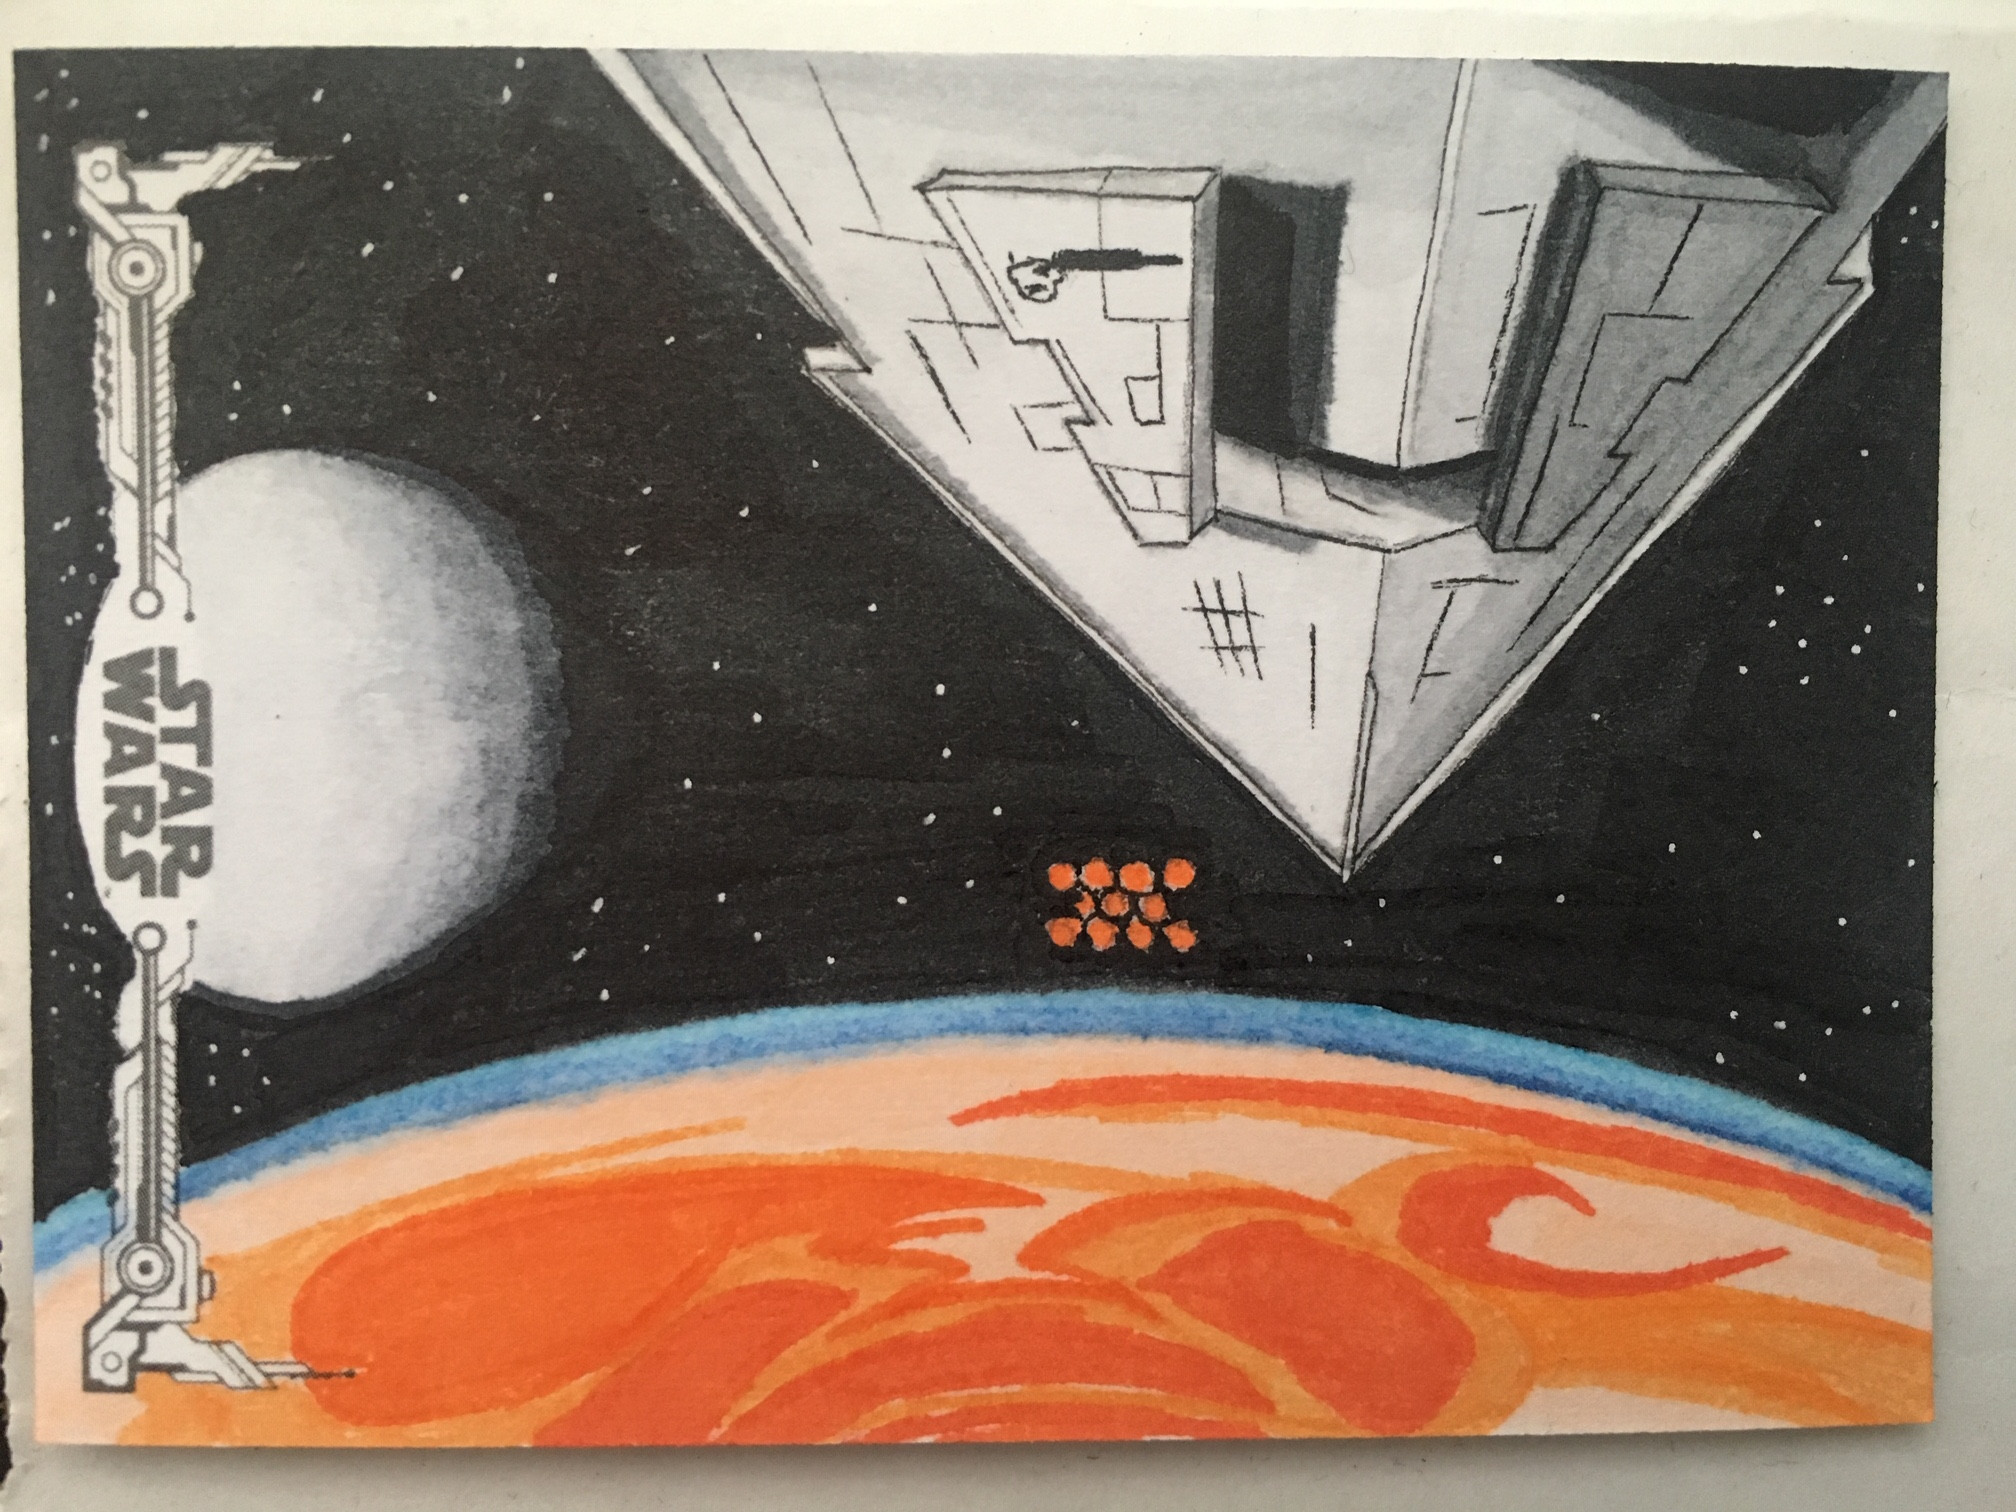 Art created for Topps trading cards Star Wars ANH B&amp;W